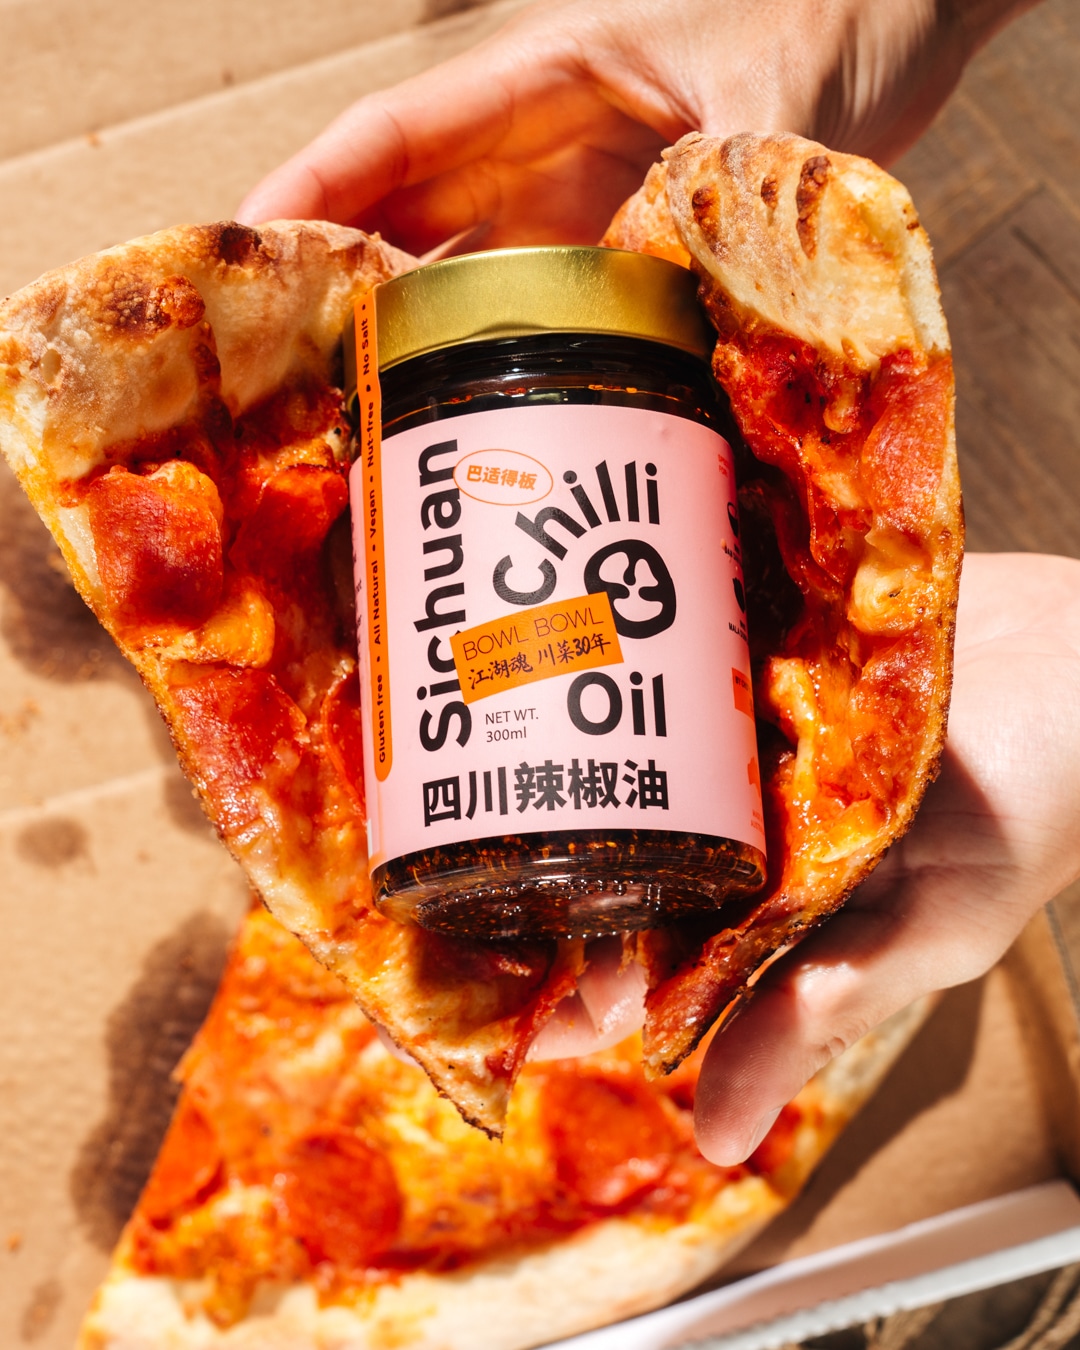 Food photography of jar of chilli oil and pizza from a hospitality marketing campaign.